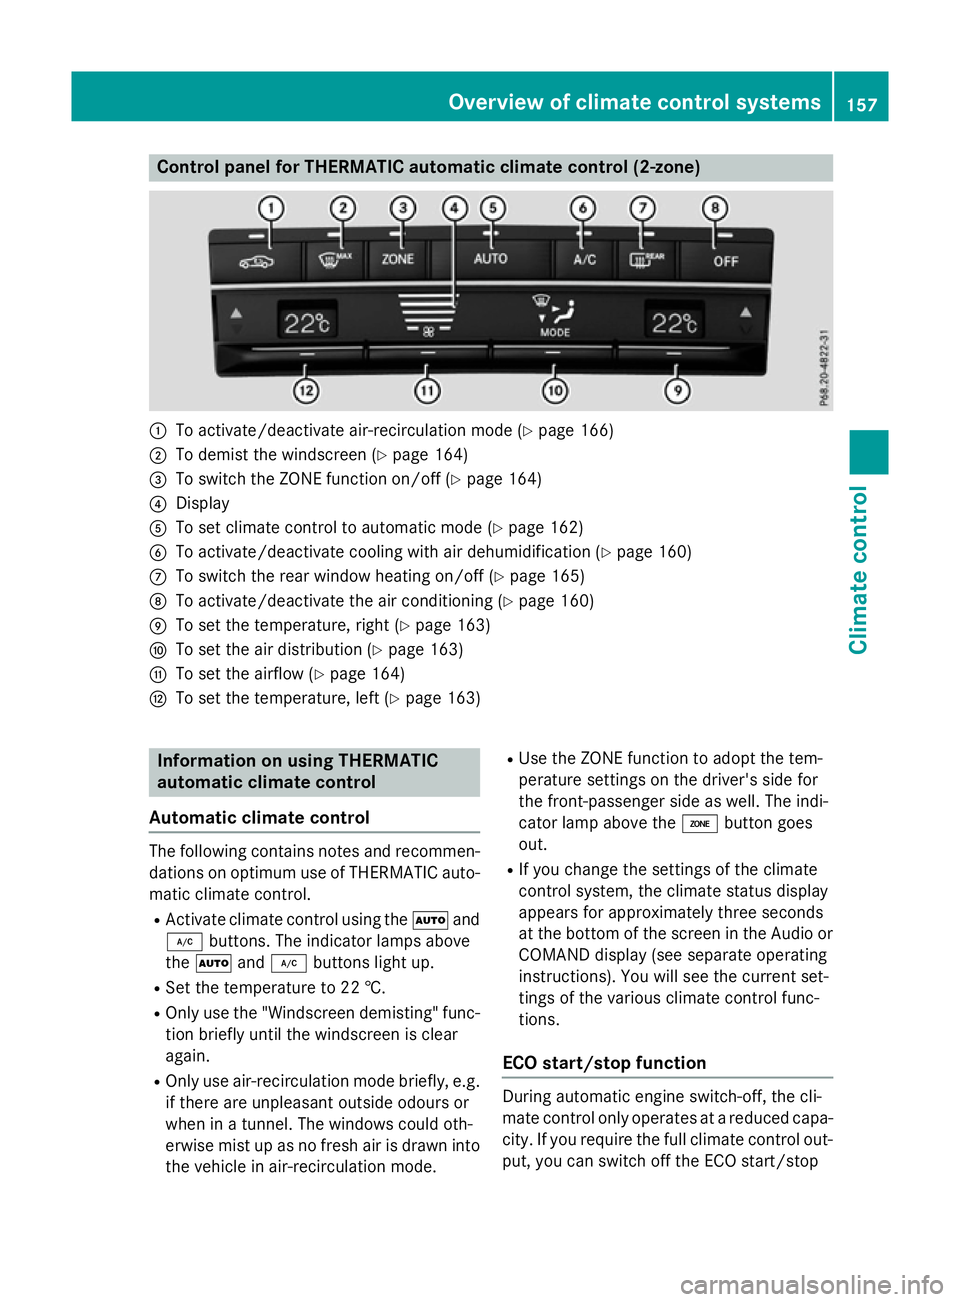 MERCEDES-BENZ E-CLASS SALOON 2015  Owners Manual Control panel for THERMATIC automatic climat
econtrol (2-zone) :
To activate/deactivat eair-recirculation mod e(Ypage 166)
; To demist th ewindscree n(Ypage 164)
= To switch th eZONE function on/of f(